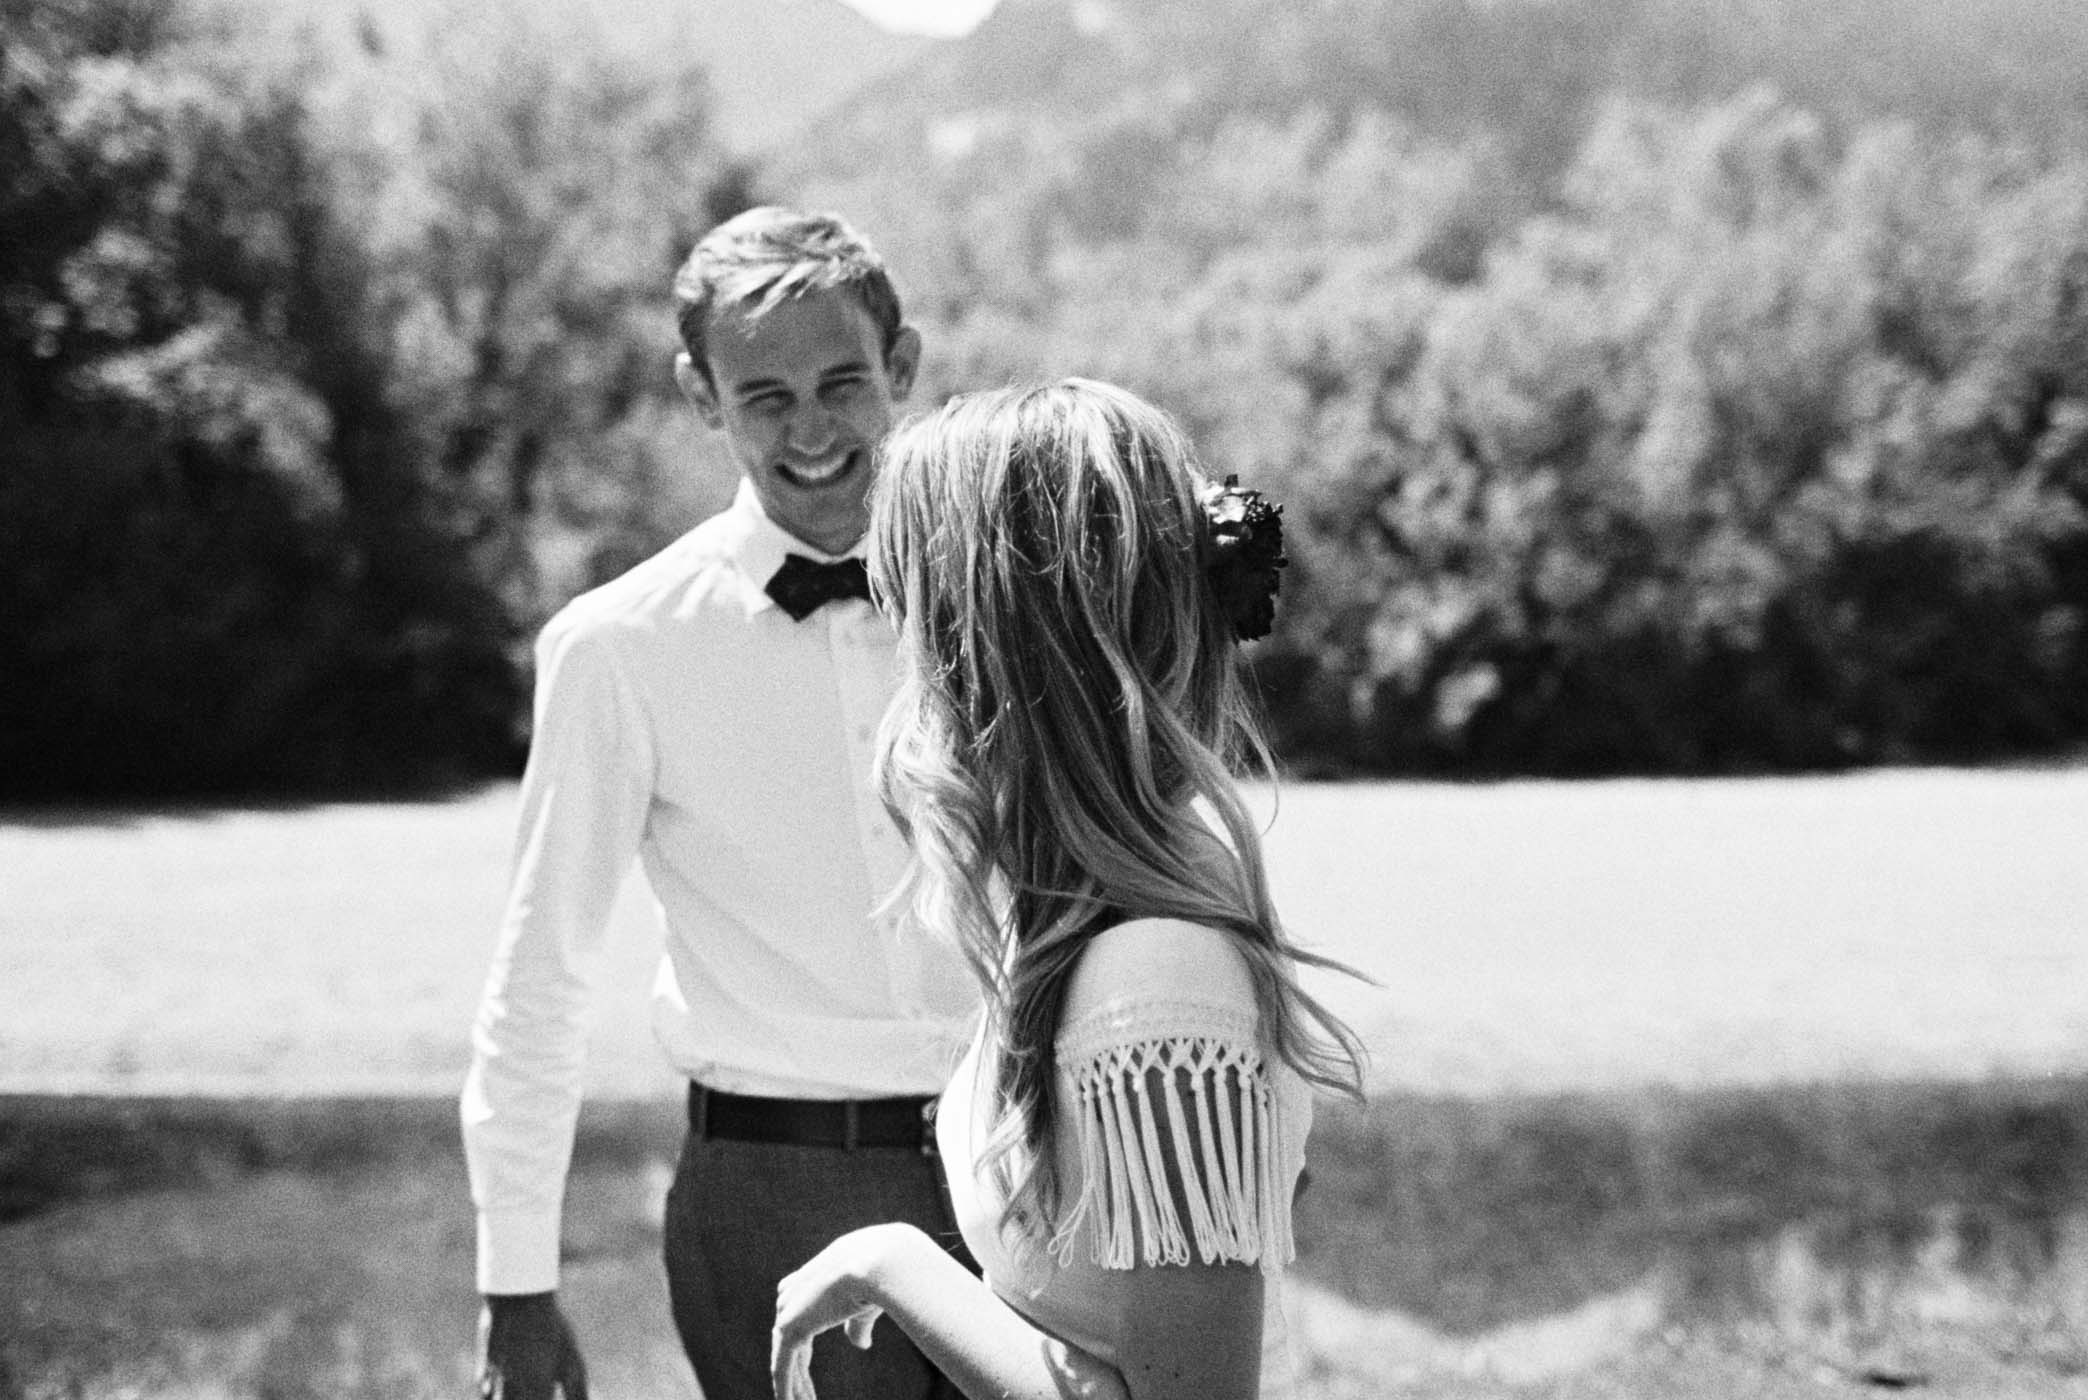 Candid moments at an adventurous Leavenworth wedding